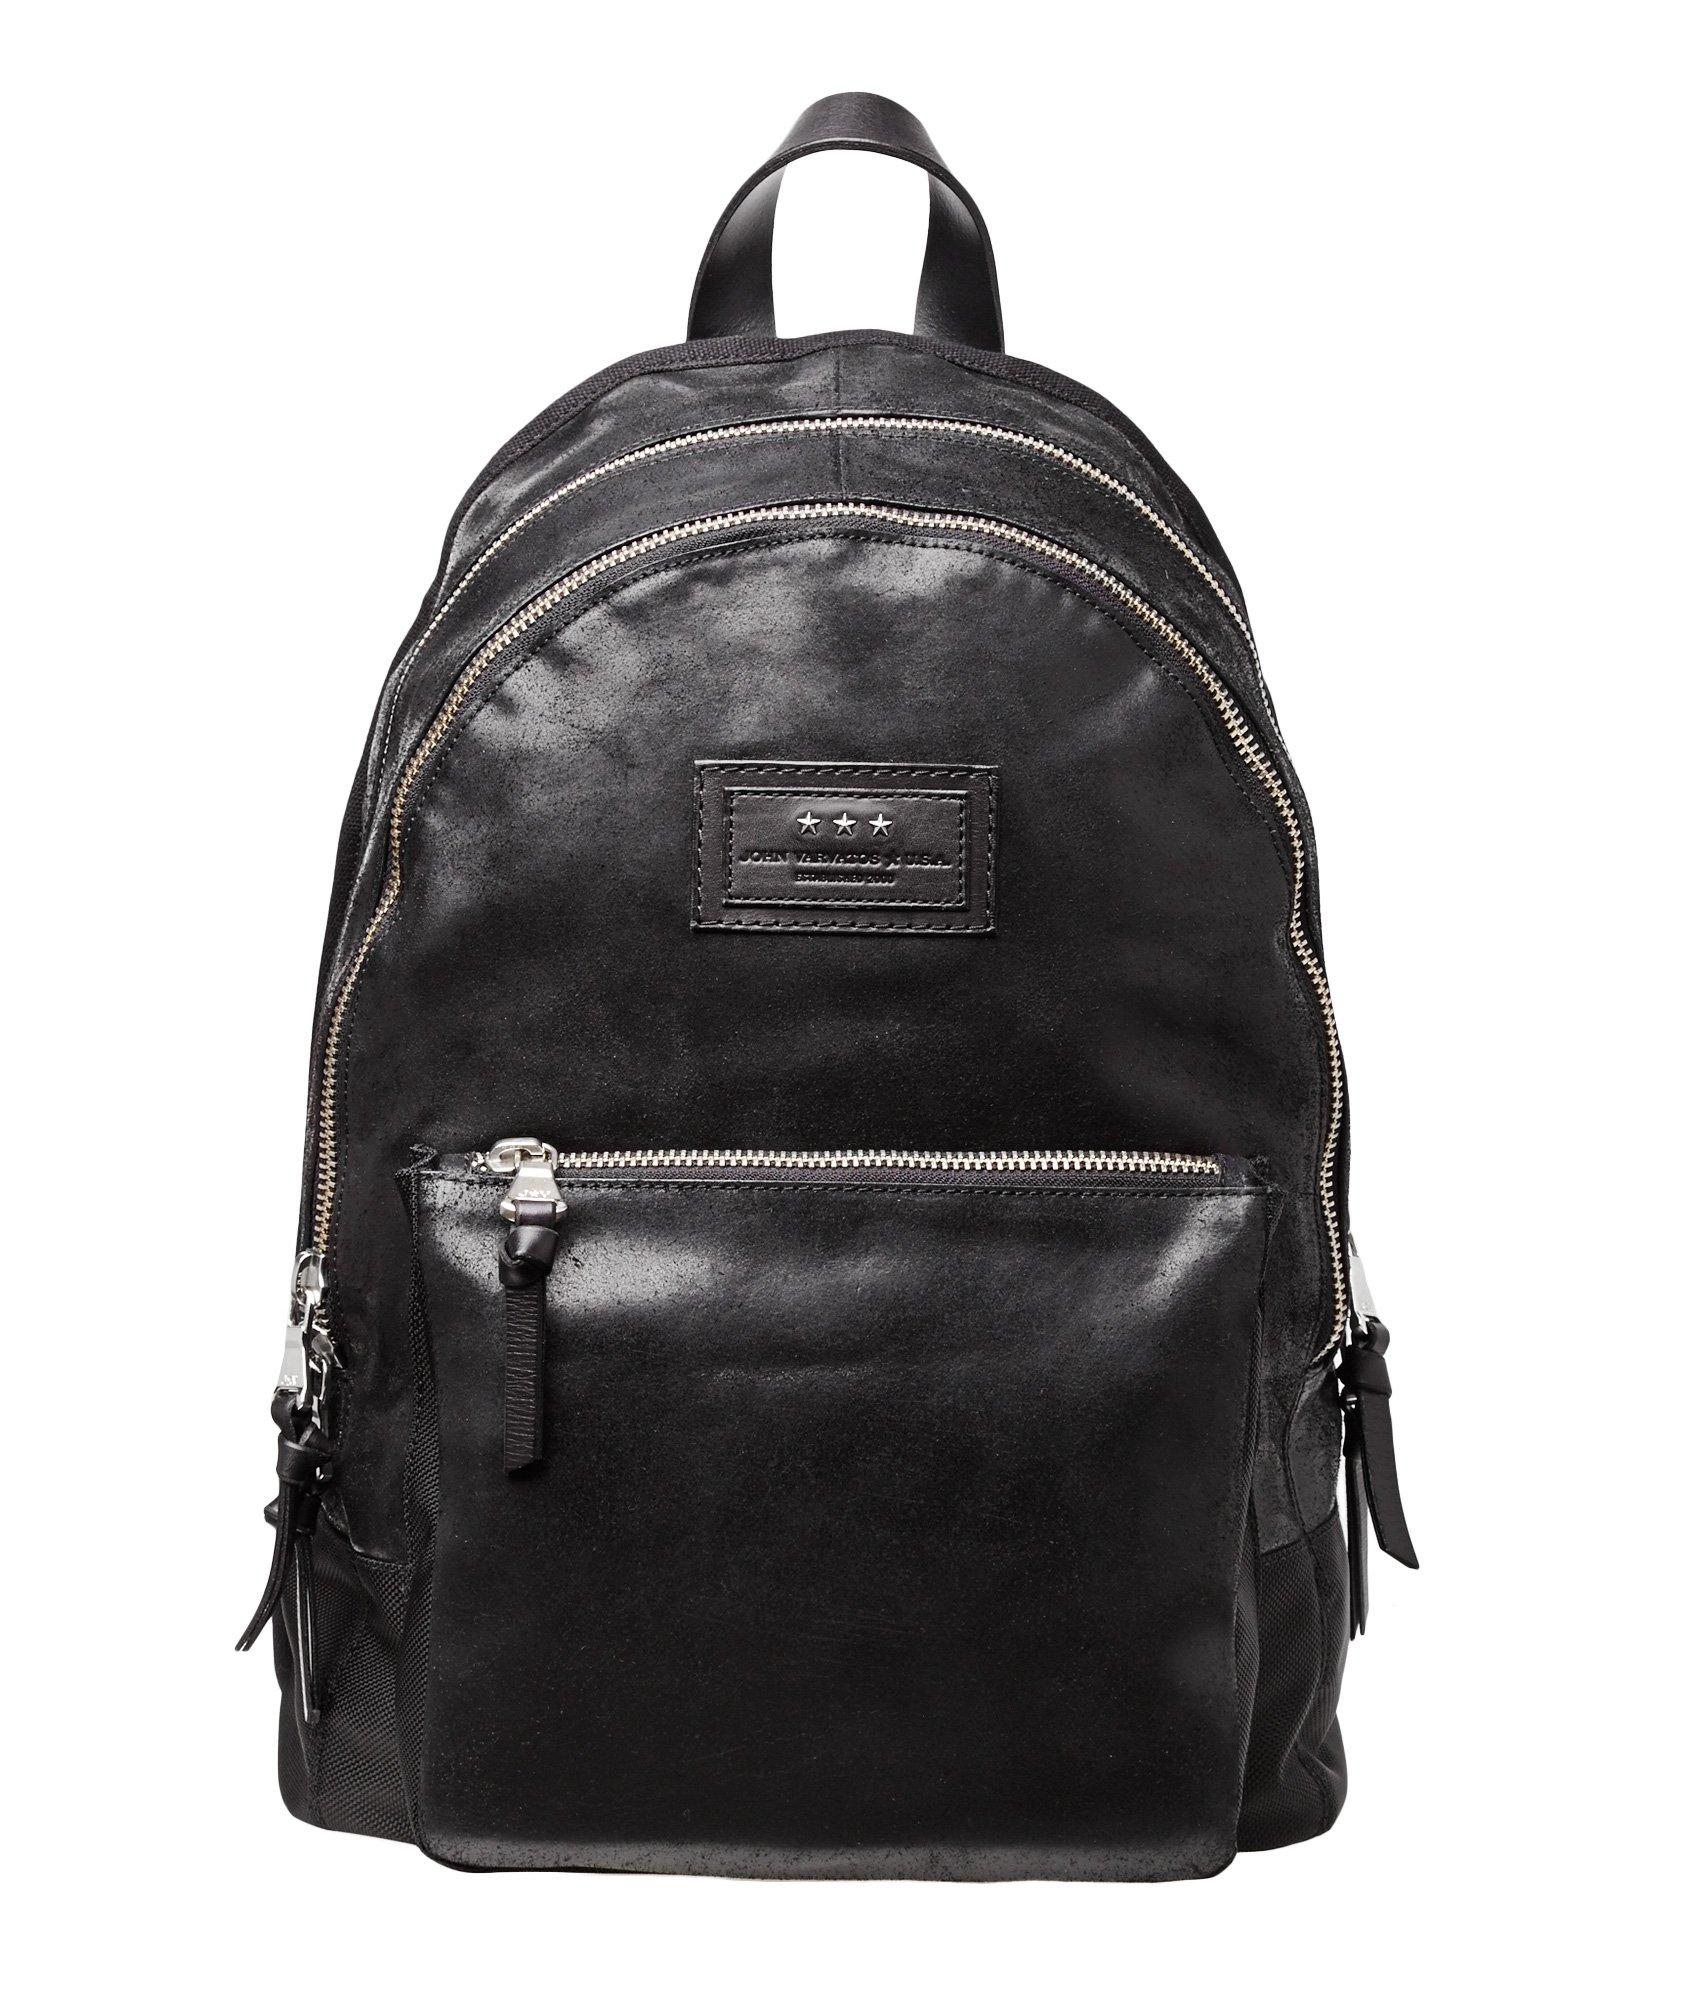 Waxed Leather Backpack image 0